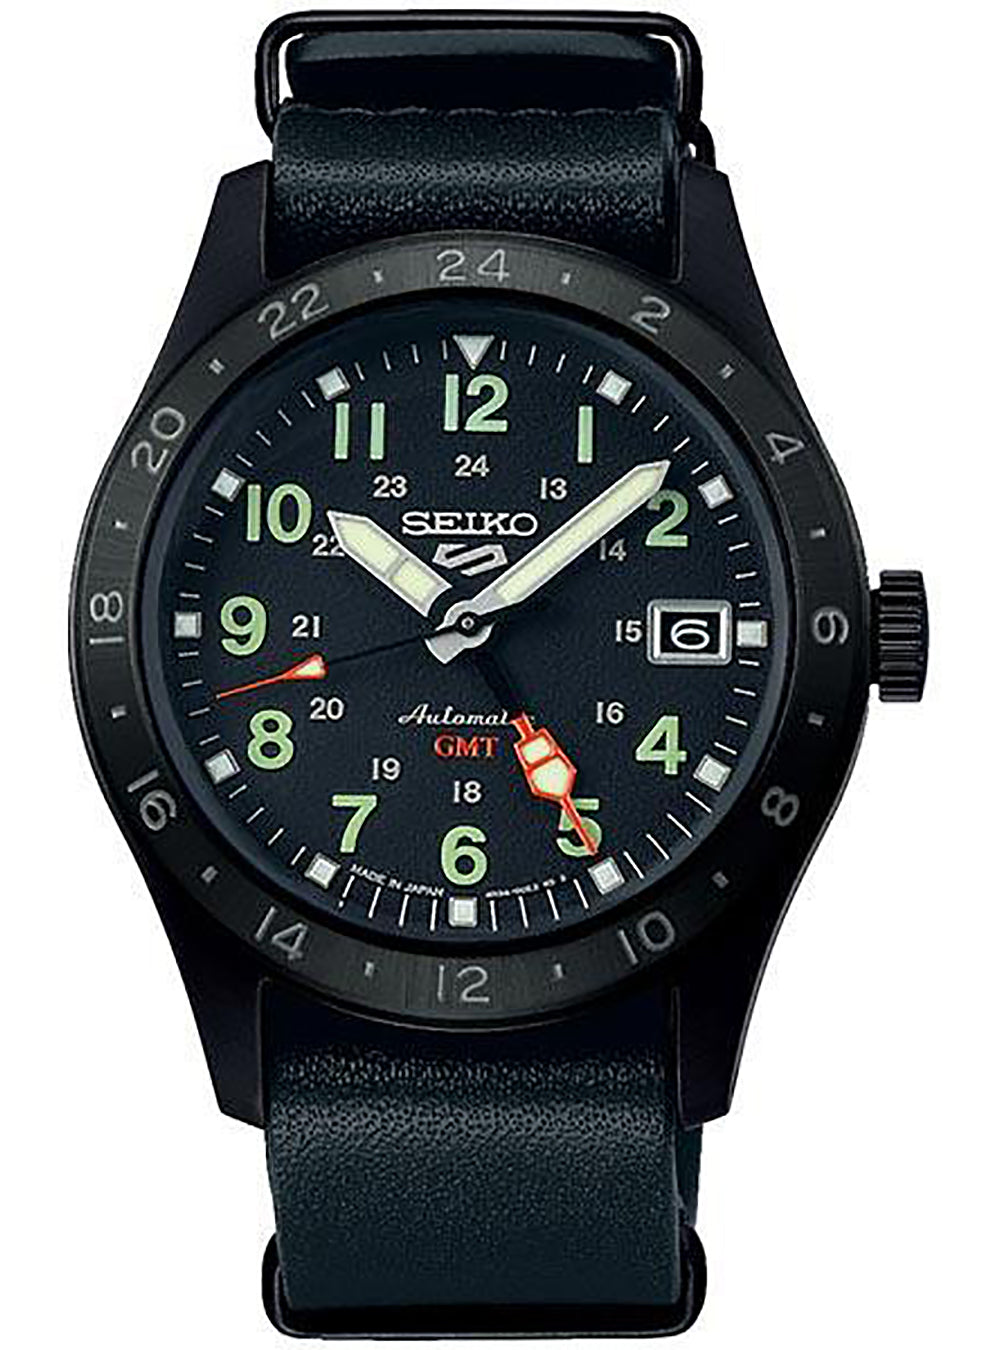 SEIKO 5 SPORTS SKX SPORTS STYLE MADE IN JAPAN JDM